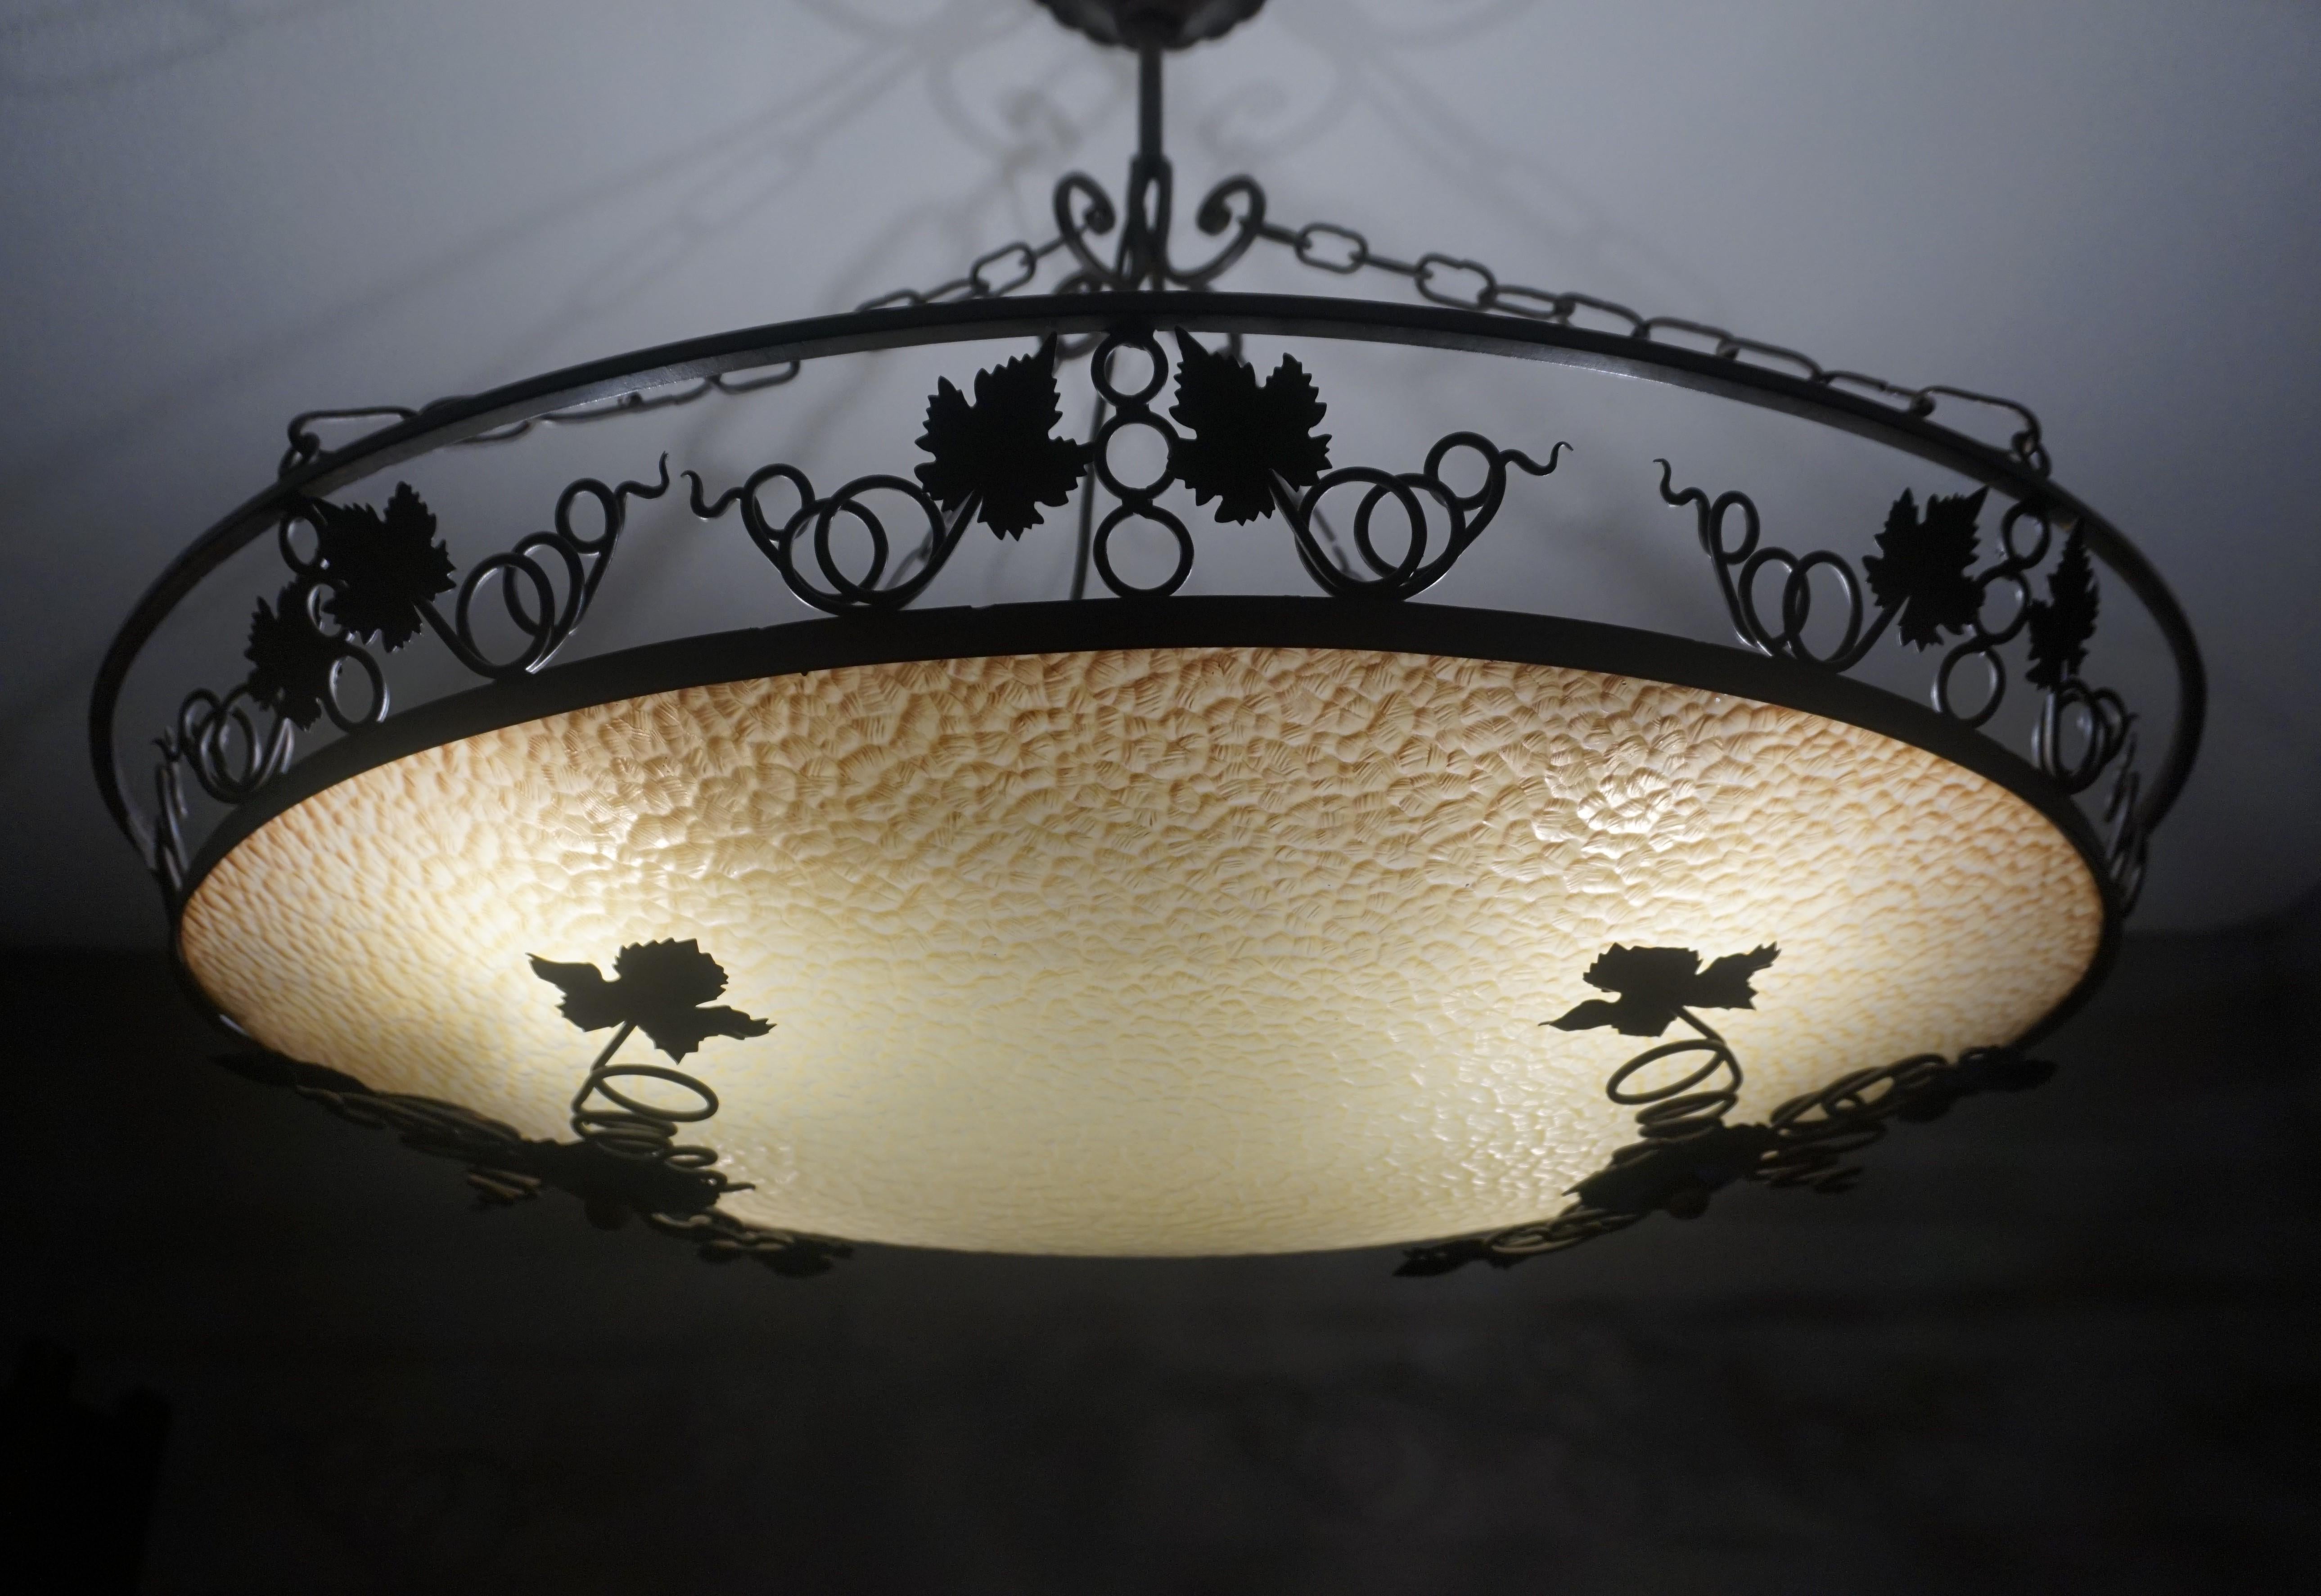 Perfect shape and ideal size chandelier for a dining or kitchen table.

This all handcrafted, four light chandelier from the earliest years of the 20th century has the perfect oval shape and a decor of wine leafs, which makes it the perfect light